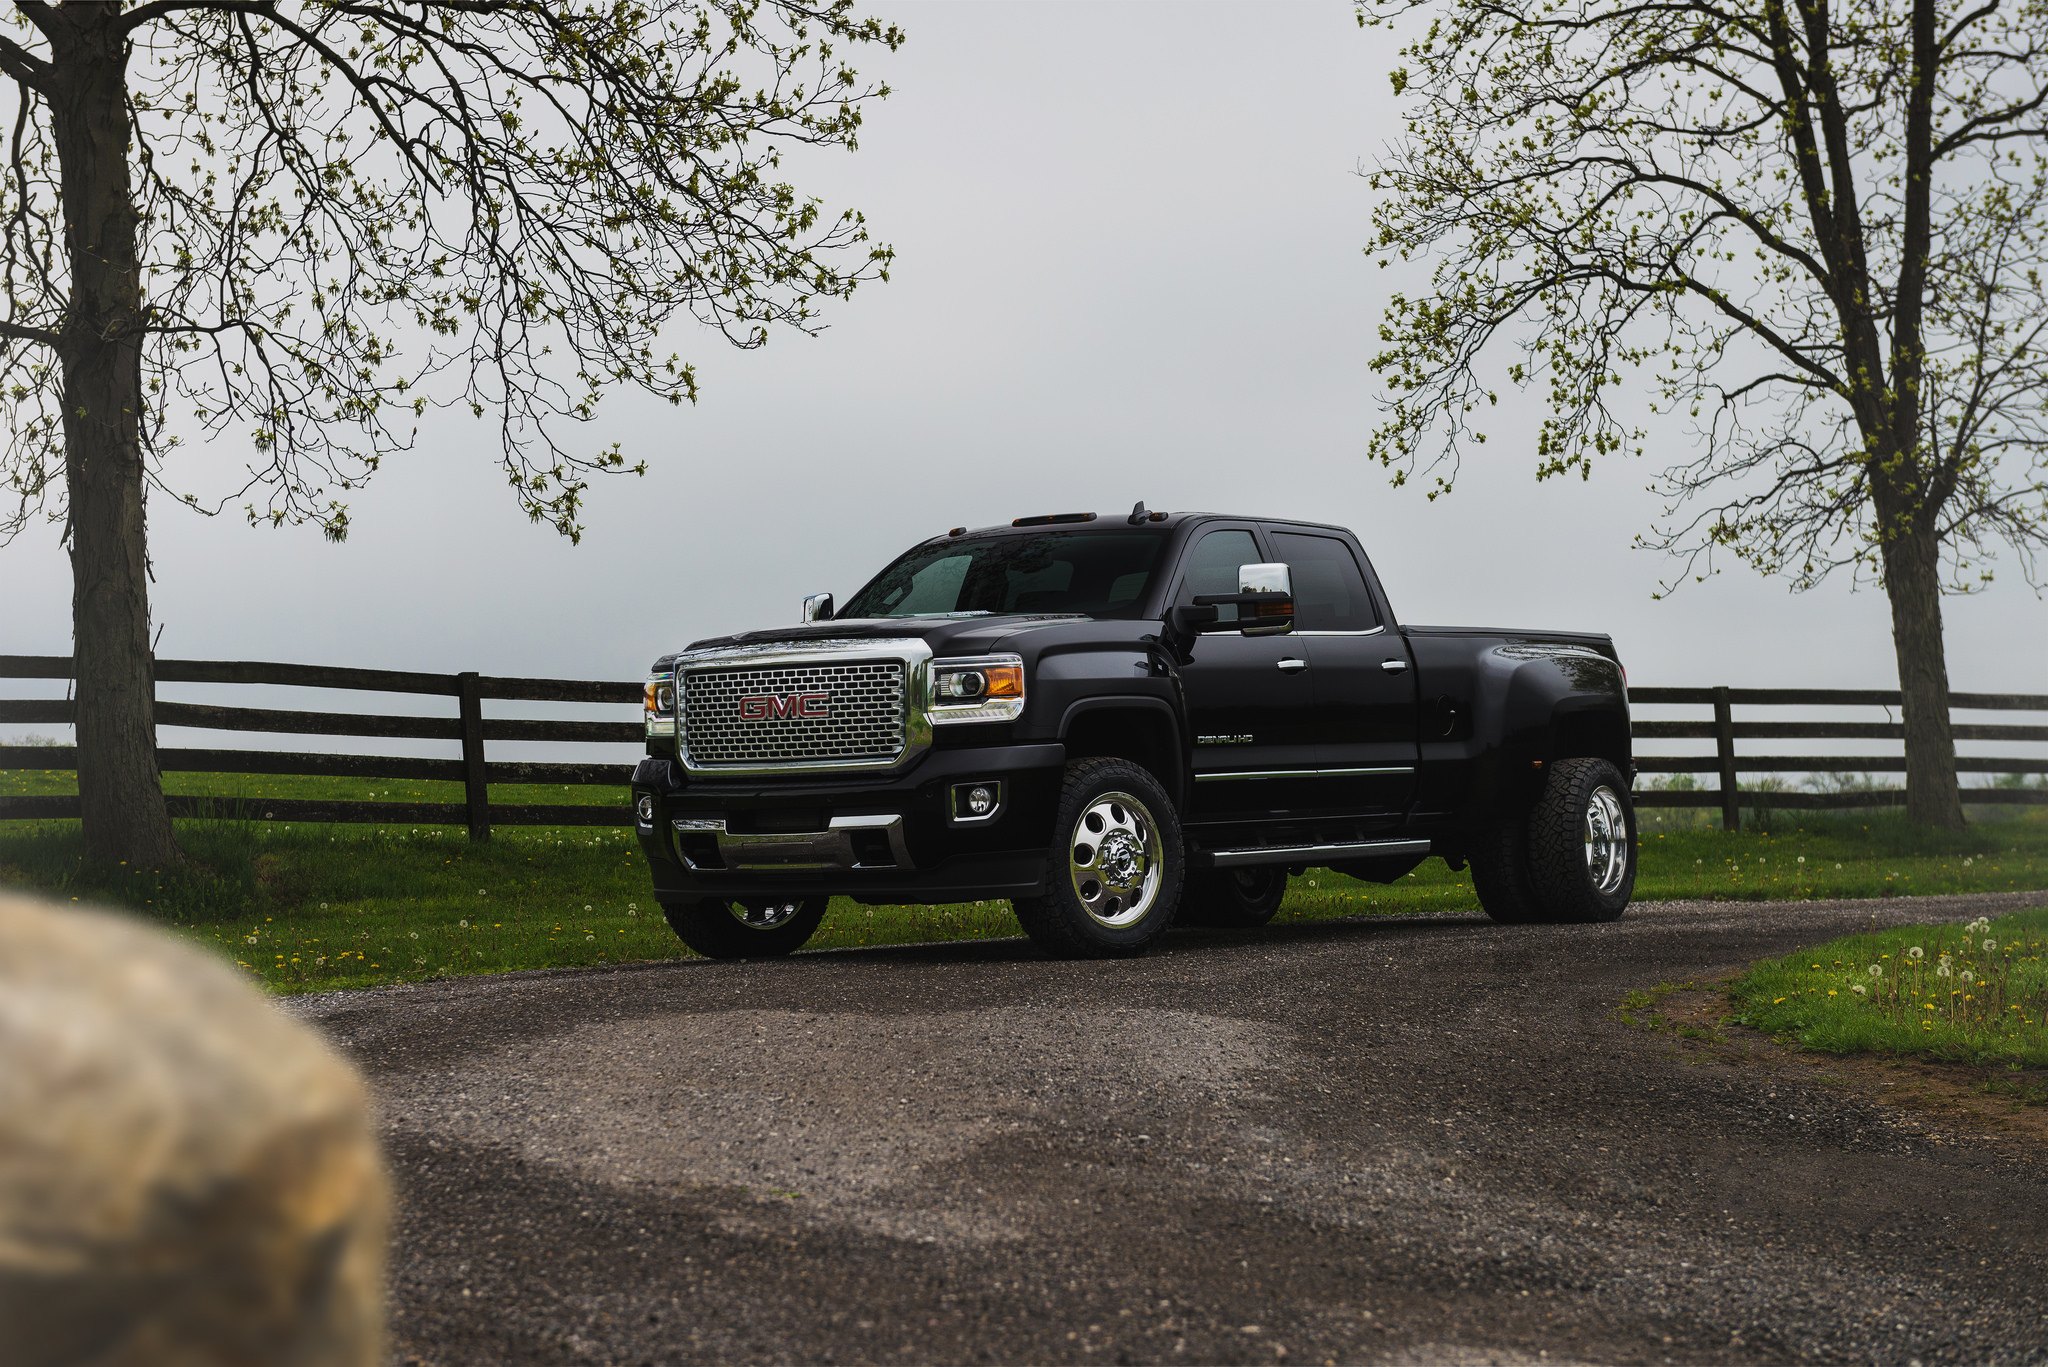 Custom Chrome Grille on Black GMC Sierra - Photo by Fuel Offroad